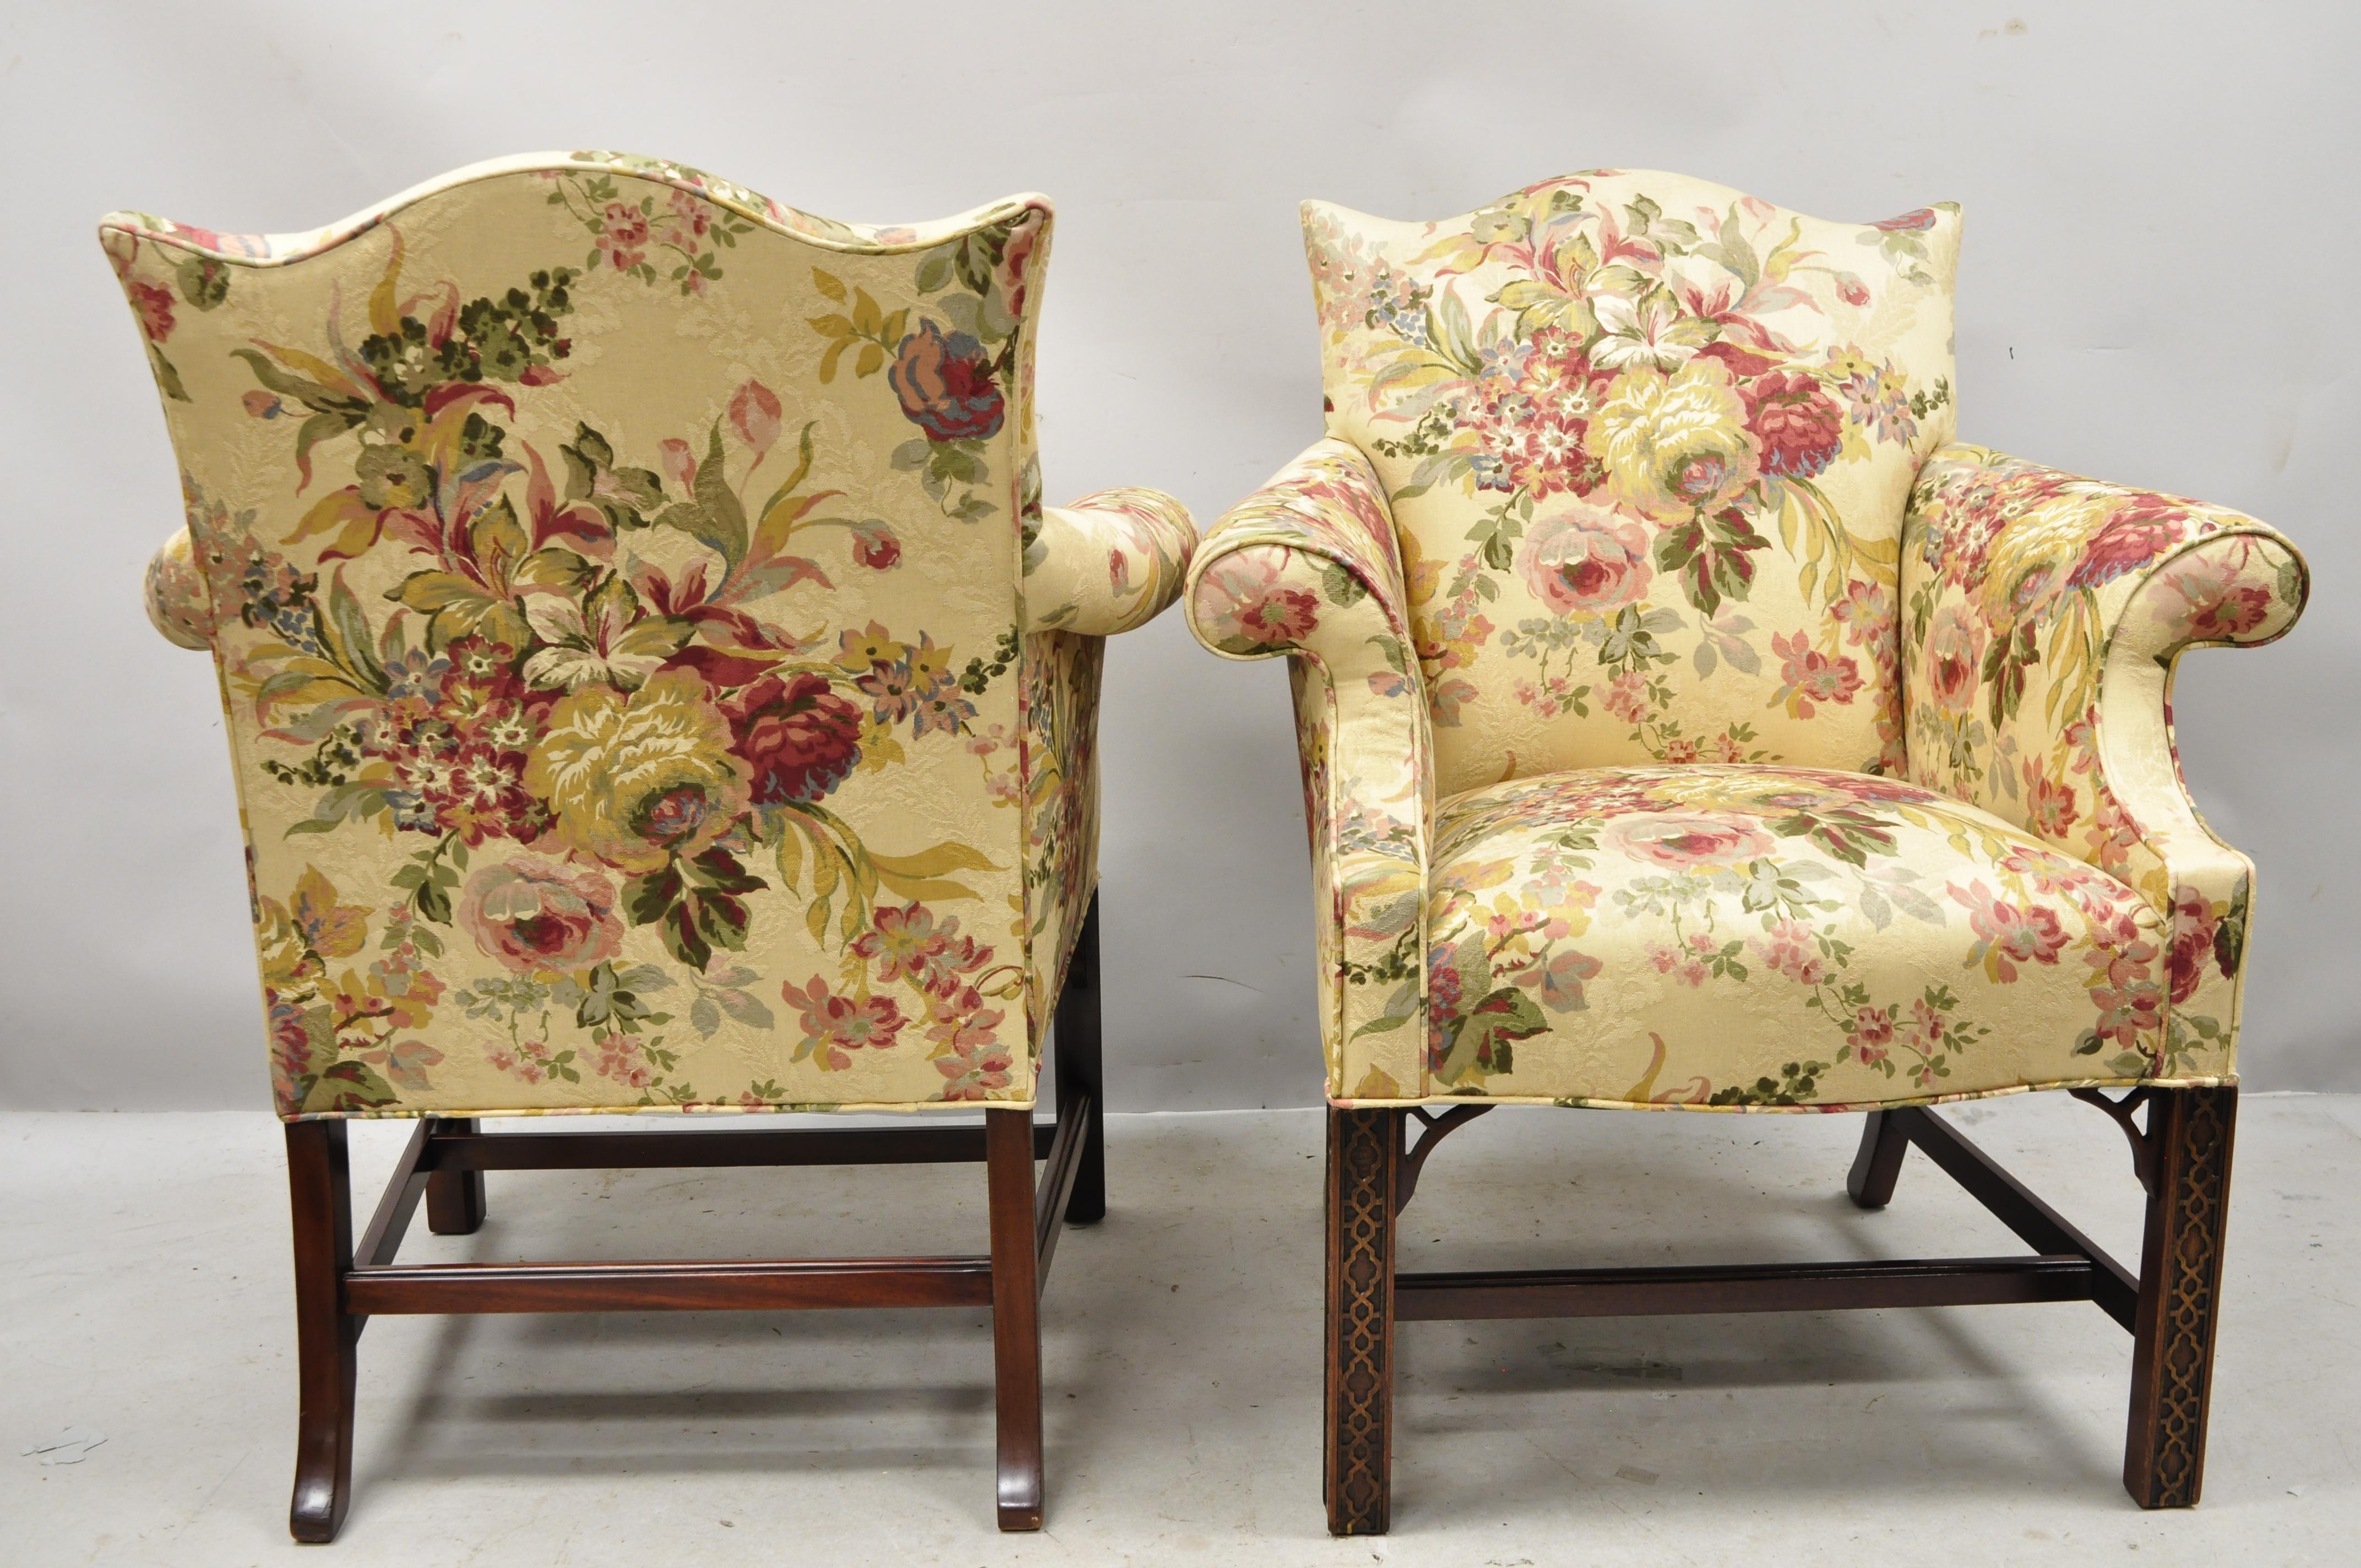 20th Century Southwood Chinese Chippendale Carved Fretwork Legs Lounge Armchairs, a Pair